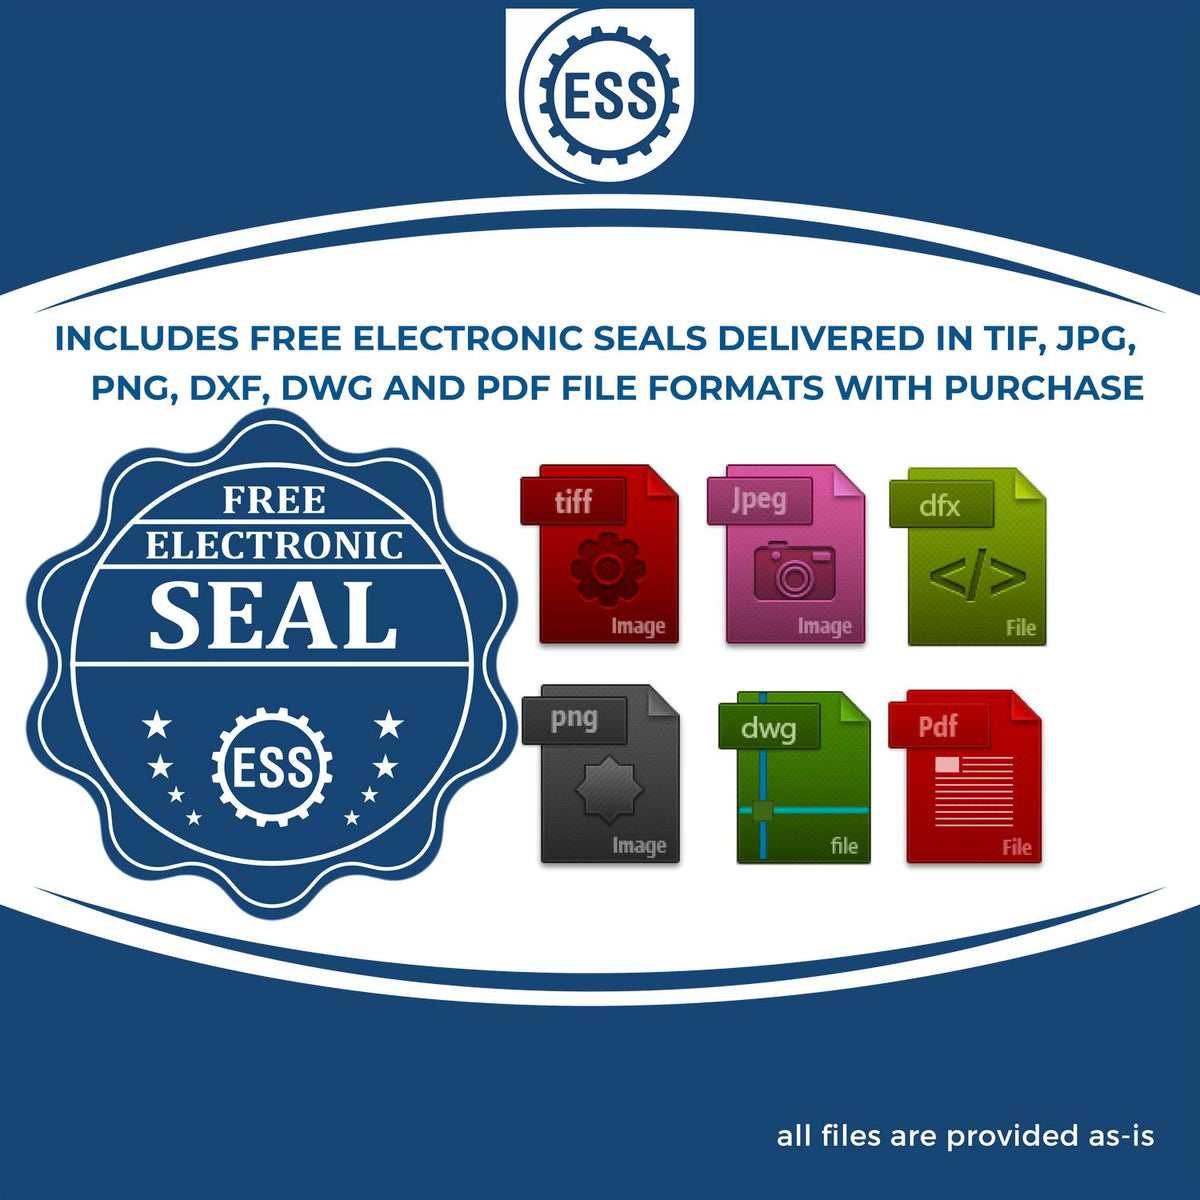 An infographic for the free electronic seal for the Slim Pre-Inked Washington Land Surveyor Seal Stamp illustrating the different file type icons such as DXF, DWG, TIF, JPG and PNG.